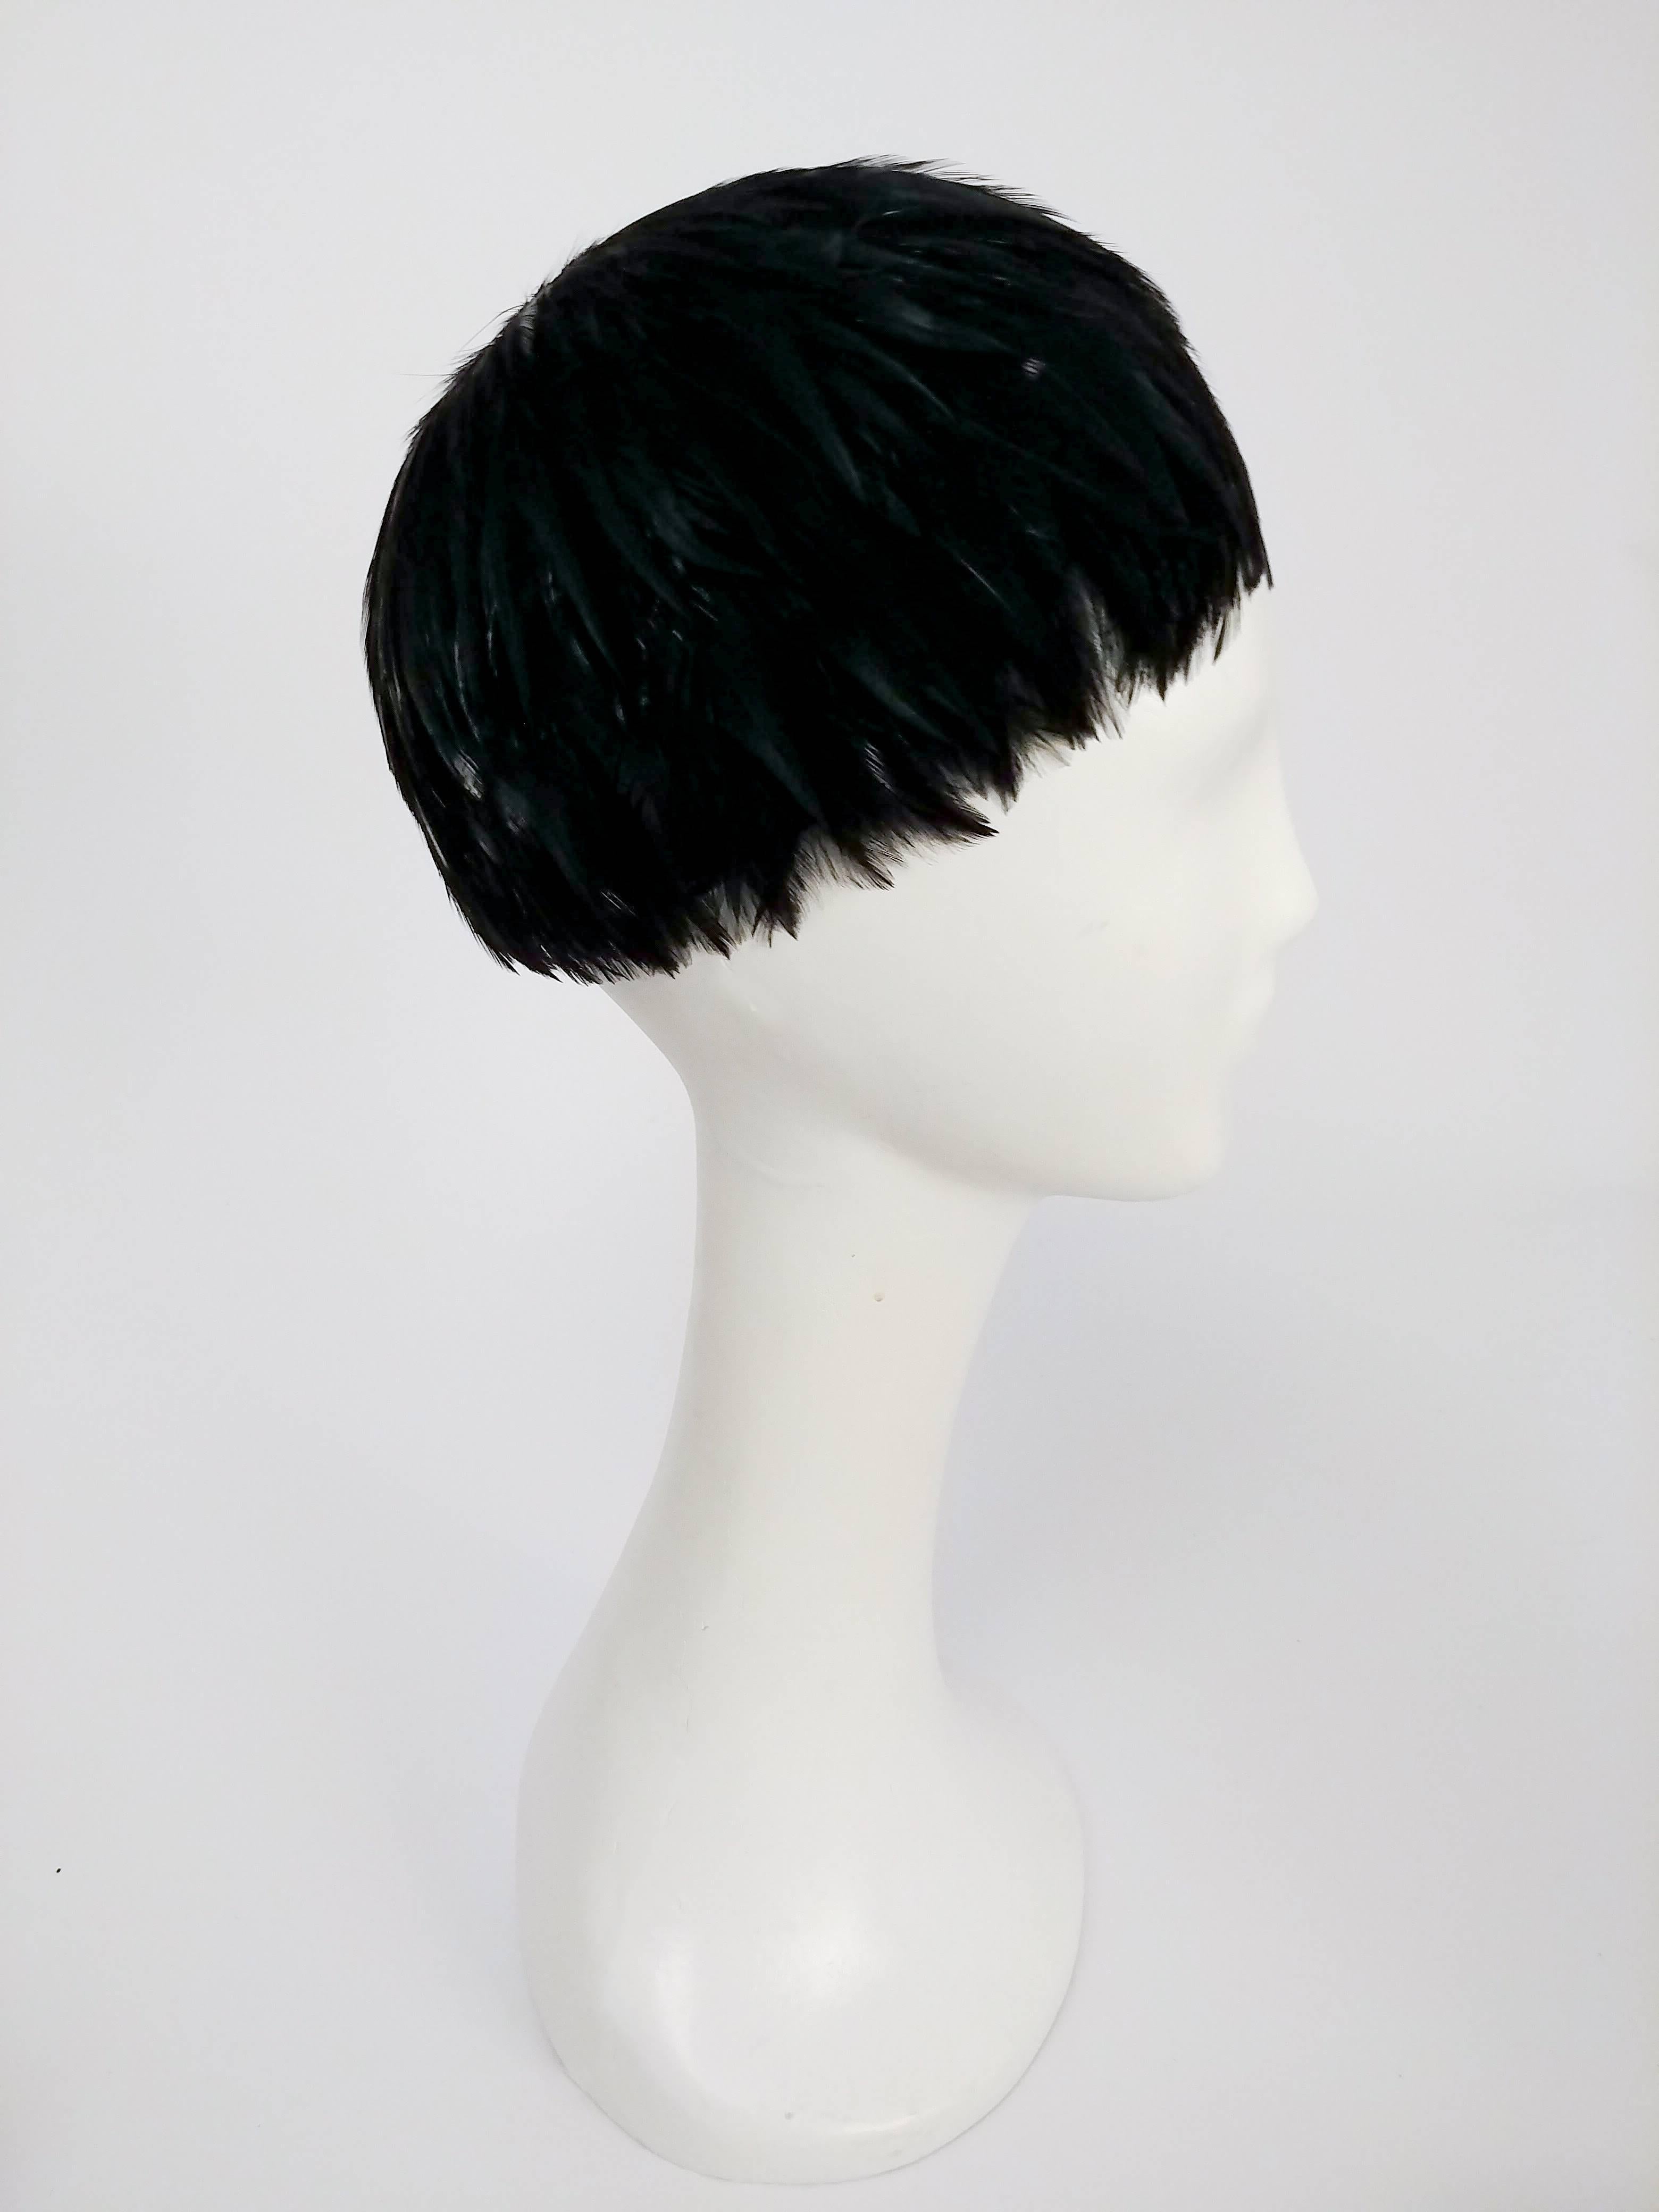 1960s Black Feather Hat. All-over true black feathers cover the entirety of this hat, a true classy vintage look!